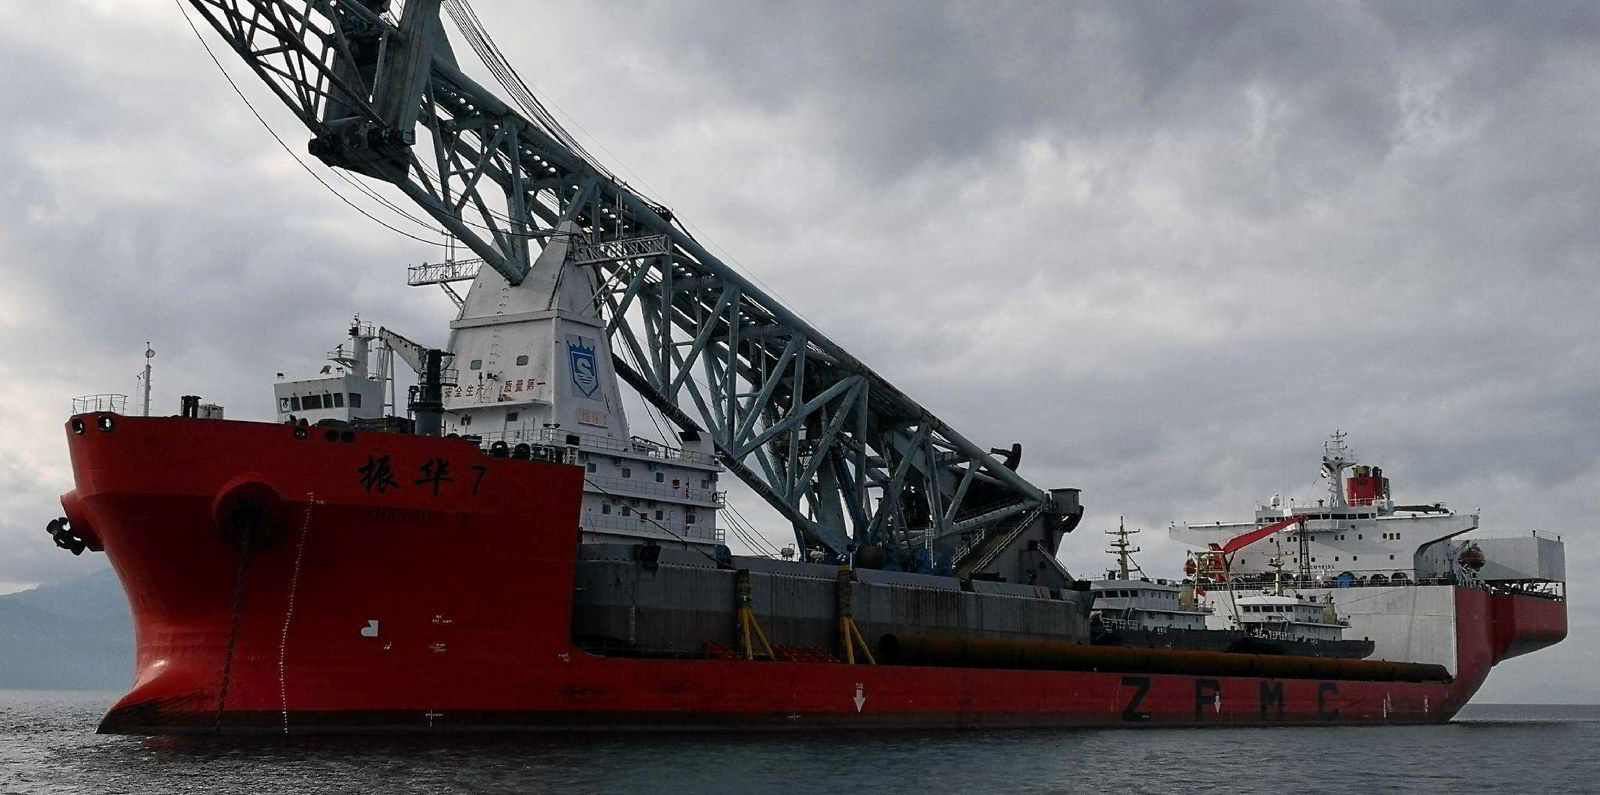 14 Chinese crew kidnapped from heavylift ship | TradeWinds